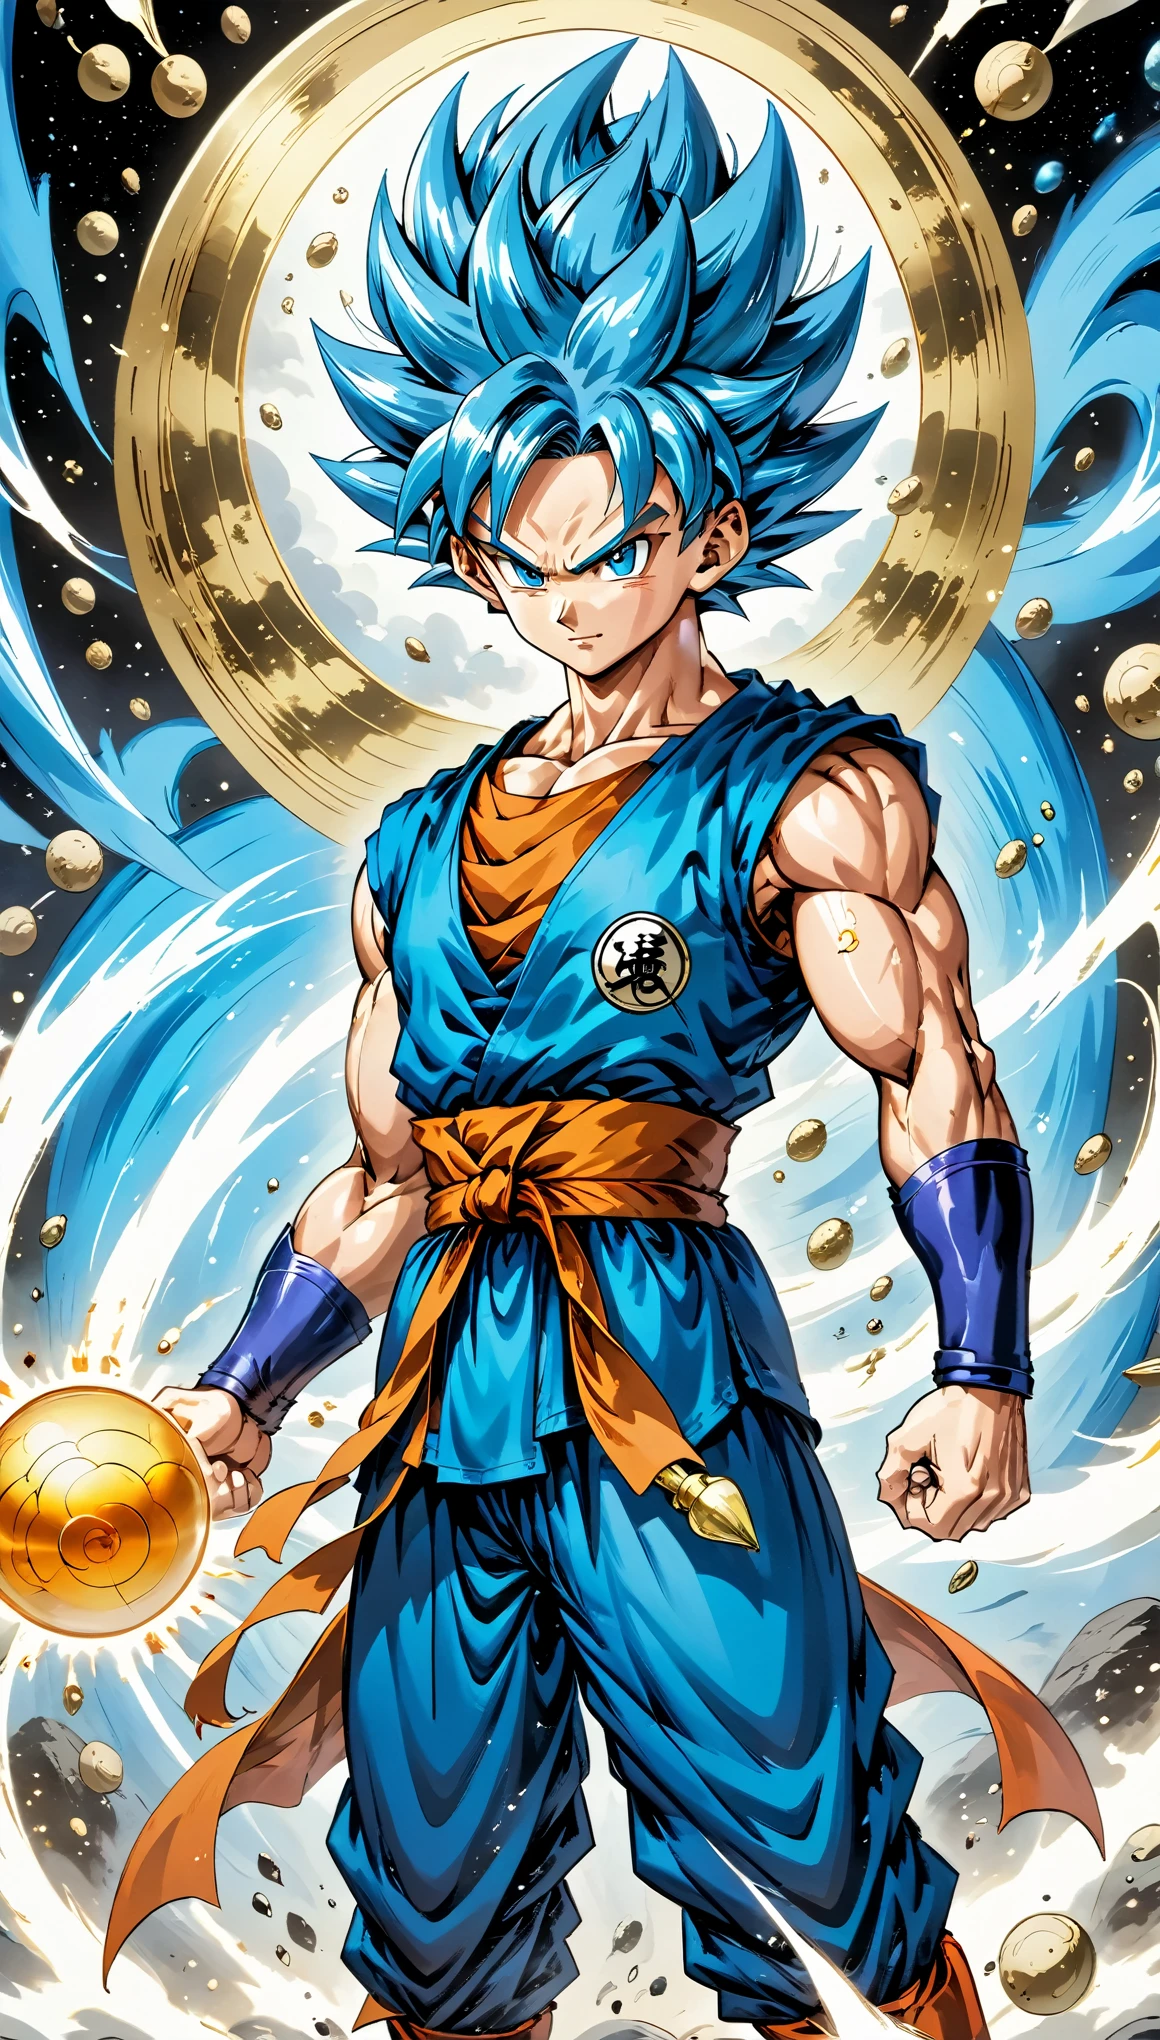 (best quality,4k,8k,high resolution,masterpiece:1.2),Super detailed,(actual,photoactual,photo-actual:1.37),illustration,dragon ball,figure,Wukong,vegnette,robust,Saiyan,fighting,energy beam,Action packed,史诗般的fighting,martial arts,Explosive force level,flight,gas explosion,Transformation,Characteristic hairstyle,muscular,otherworldly existence,fantasy,venture,superhuman strength,Supernatural abilities,angry,Axia,Namexians,robot,fighting championship,galactic conquest,cosmic threat,evil villain,The ultimate warrior,Orbital energy attack,dynamic poses,rich and colorful,shining,eye-catching,high-energy,Explosive effect,Orin Temple,dragon balls,deformation,interesting,good and evil,Teamwork,loyalty,destiny,immortal,lasting legacy,A symbol of power,The spirit of never giving up,Heroes who save the earth,larger than life,Legend,Engaging narrative,Fast-paced,Rapid heartbeat,universe-altering ventures,Dream of becoming the strongest warrior.